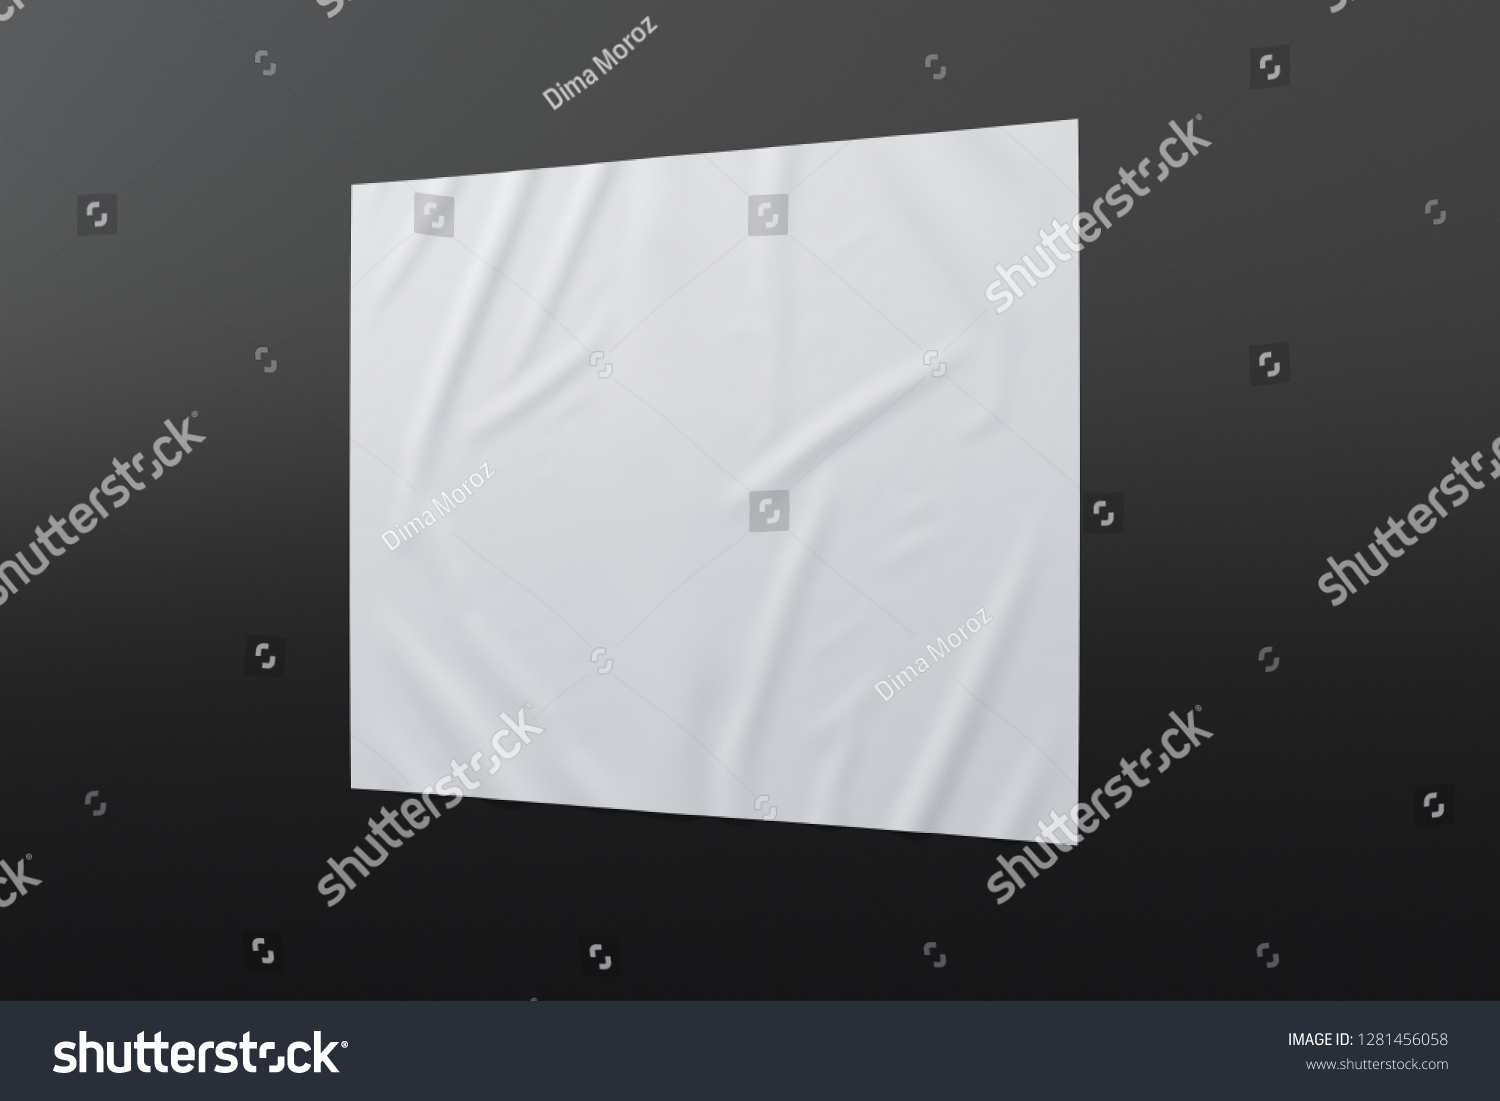 Blank horizontal wrinkled street poster on black wall. With clipping path around poster. 3d illustration #1281456058